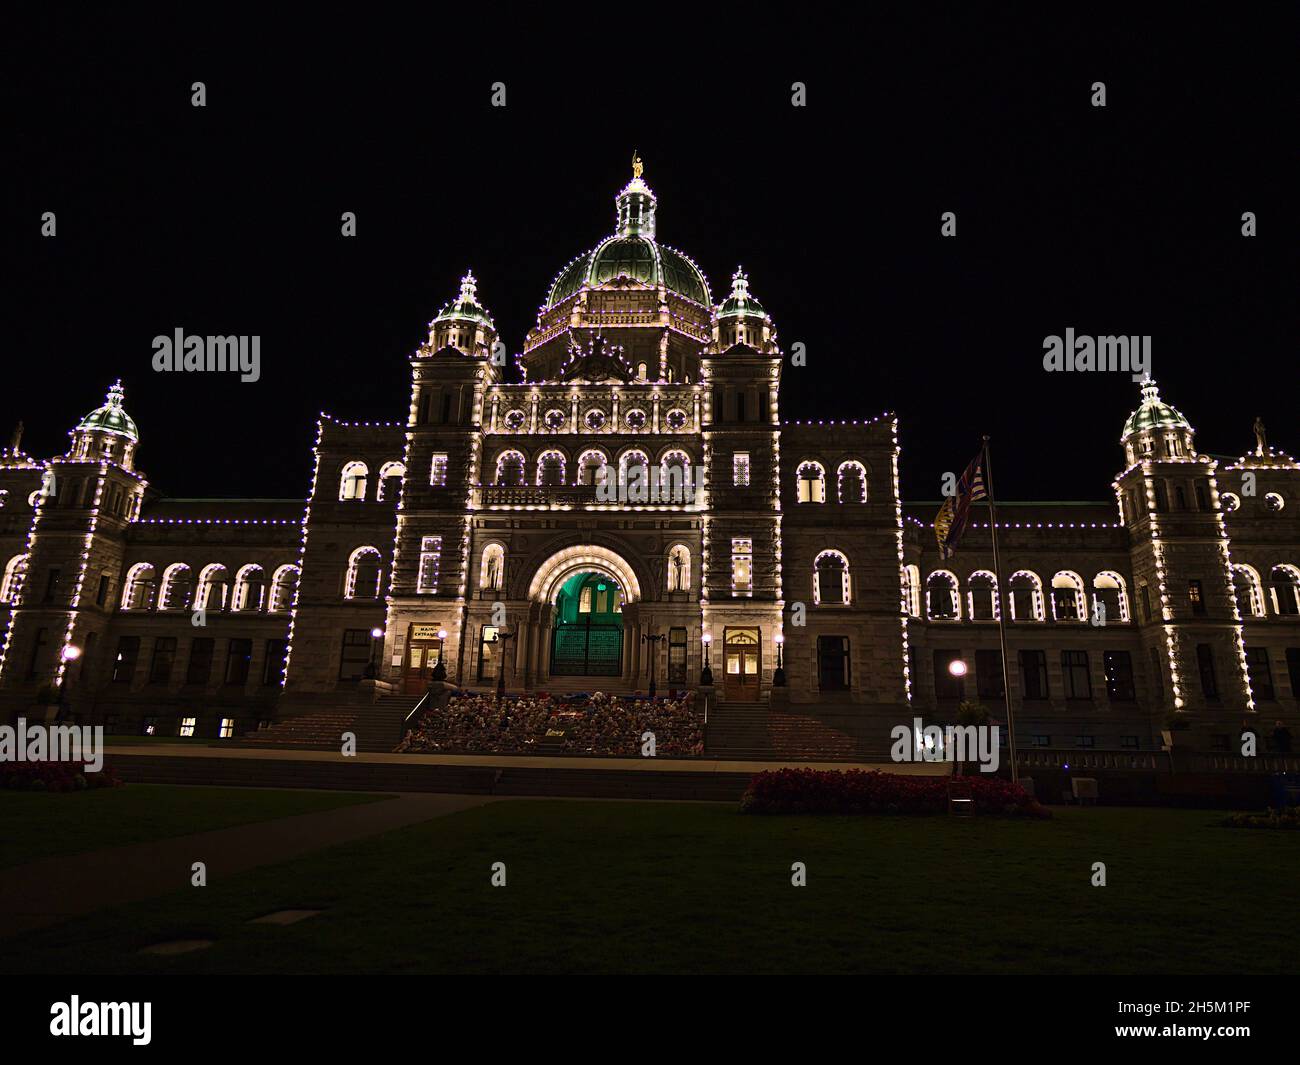 Illuminated entrance of impressive British Columbia Parliament Buildings in neo-baroque style with lights on facade in Victoria downtown, Canada. Stock Photo